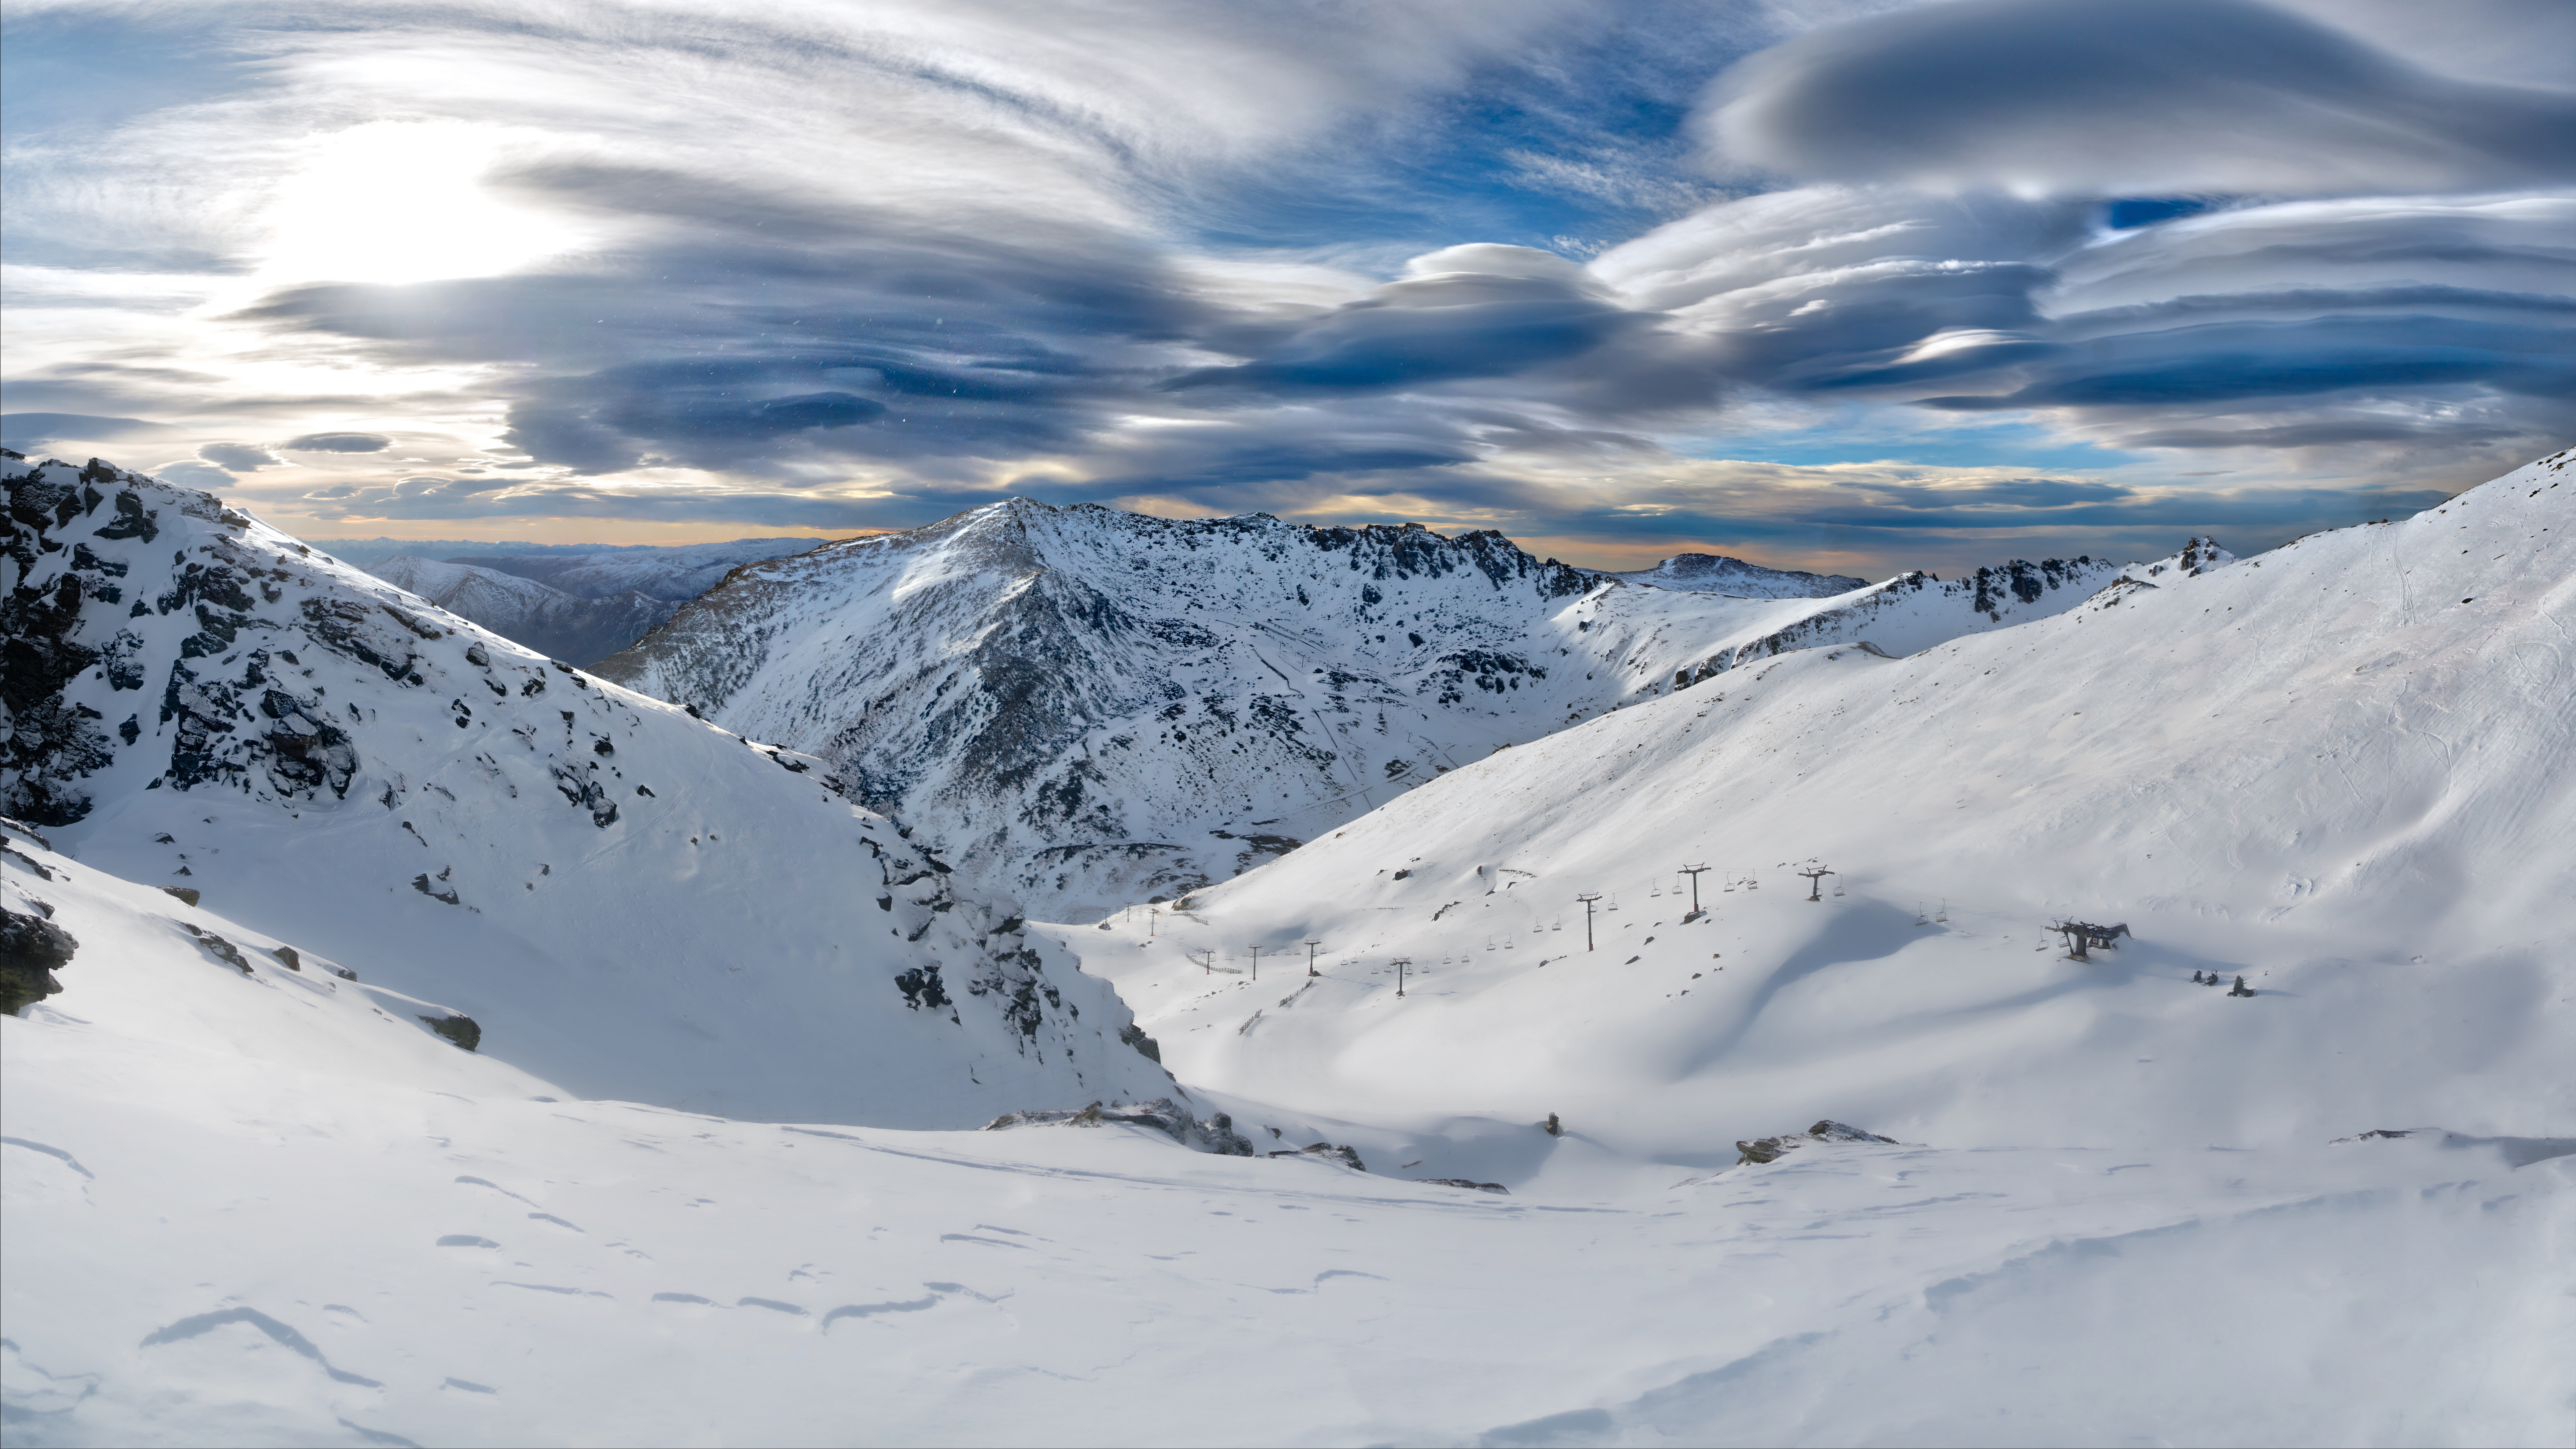 General 7680x4320 photography Trey Ratcliff landscape winter mountains snow clouds New Zealand